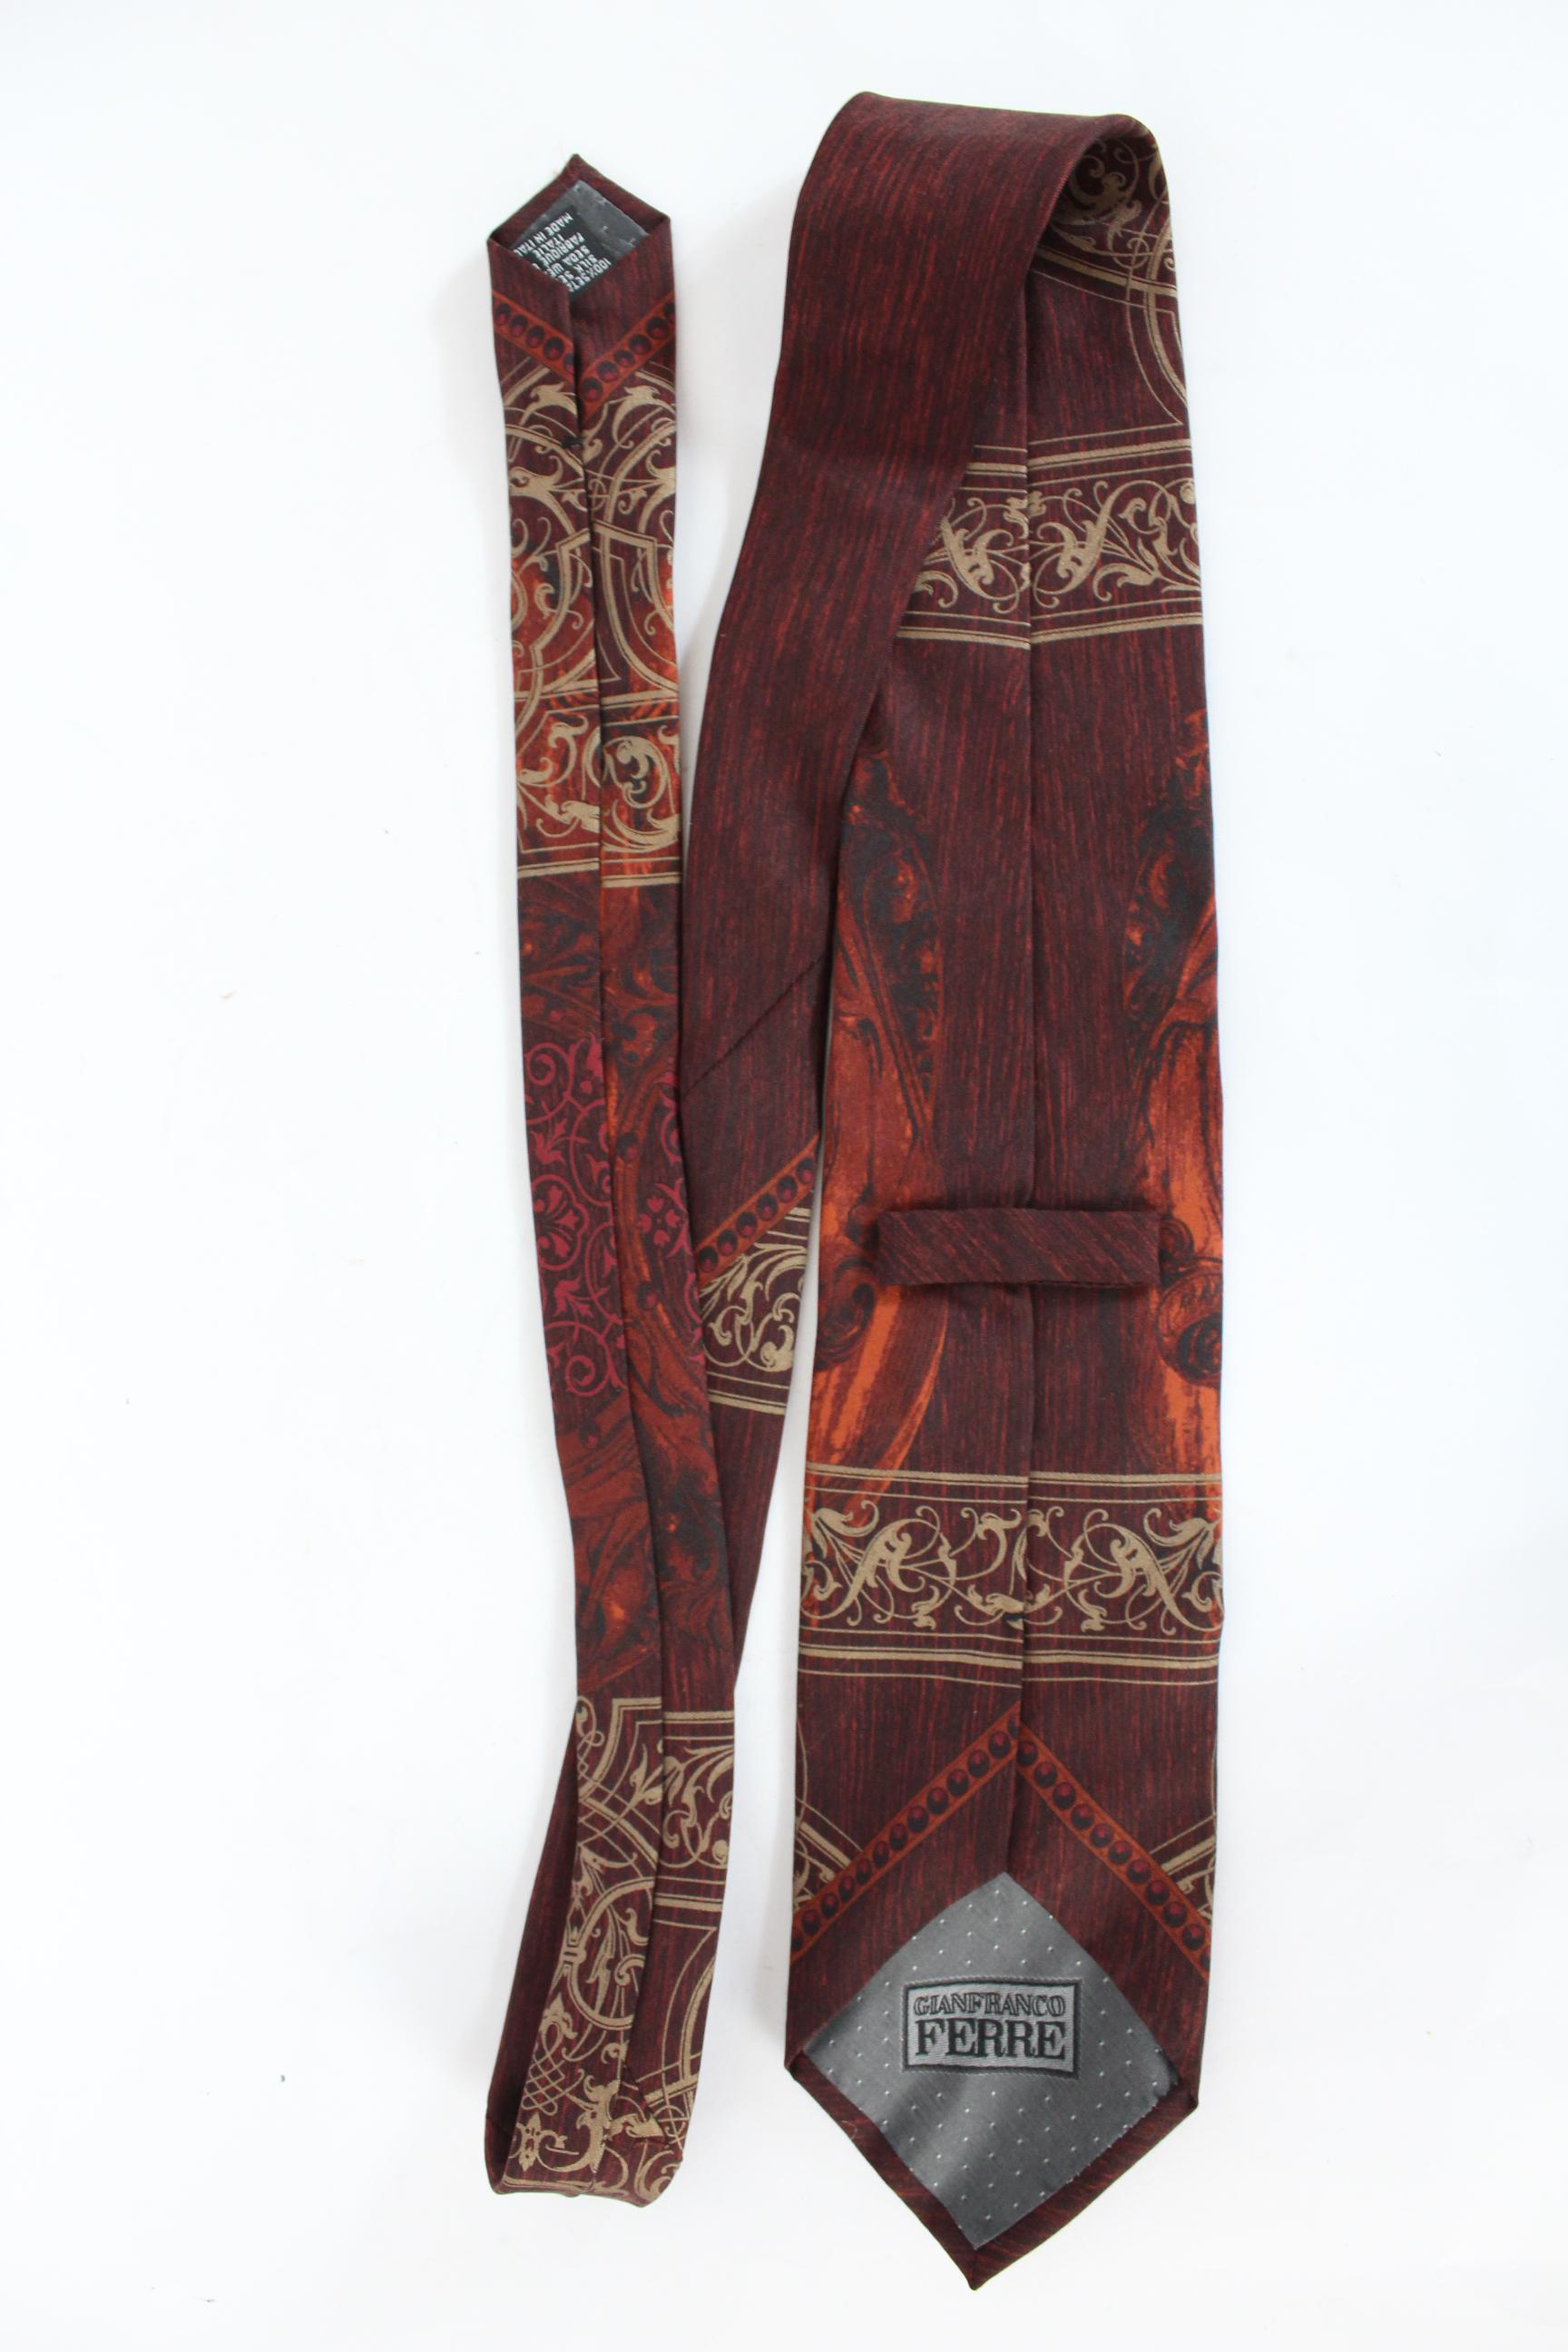 Gianfranco Ferre vintage 80s tie. Red and beige color with floral designs. 100% silk. Made in Italy. Excellent vintage condition.

Length: 143 cm
Width: 9 cm